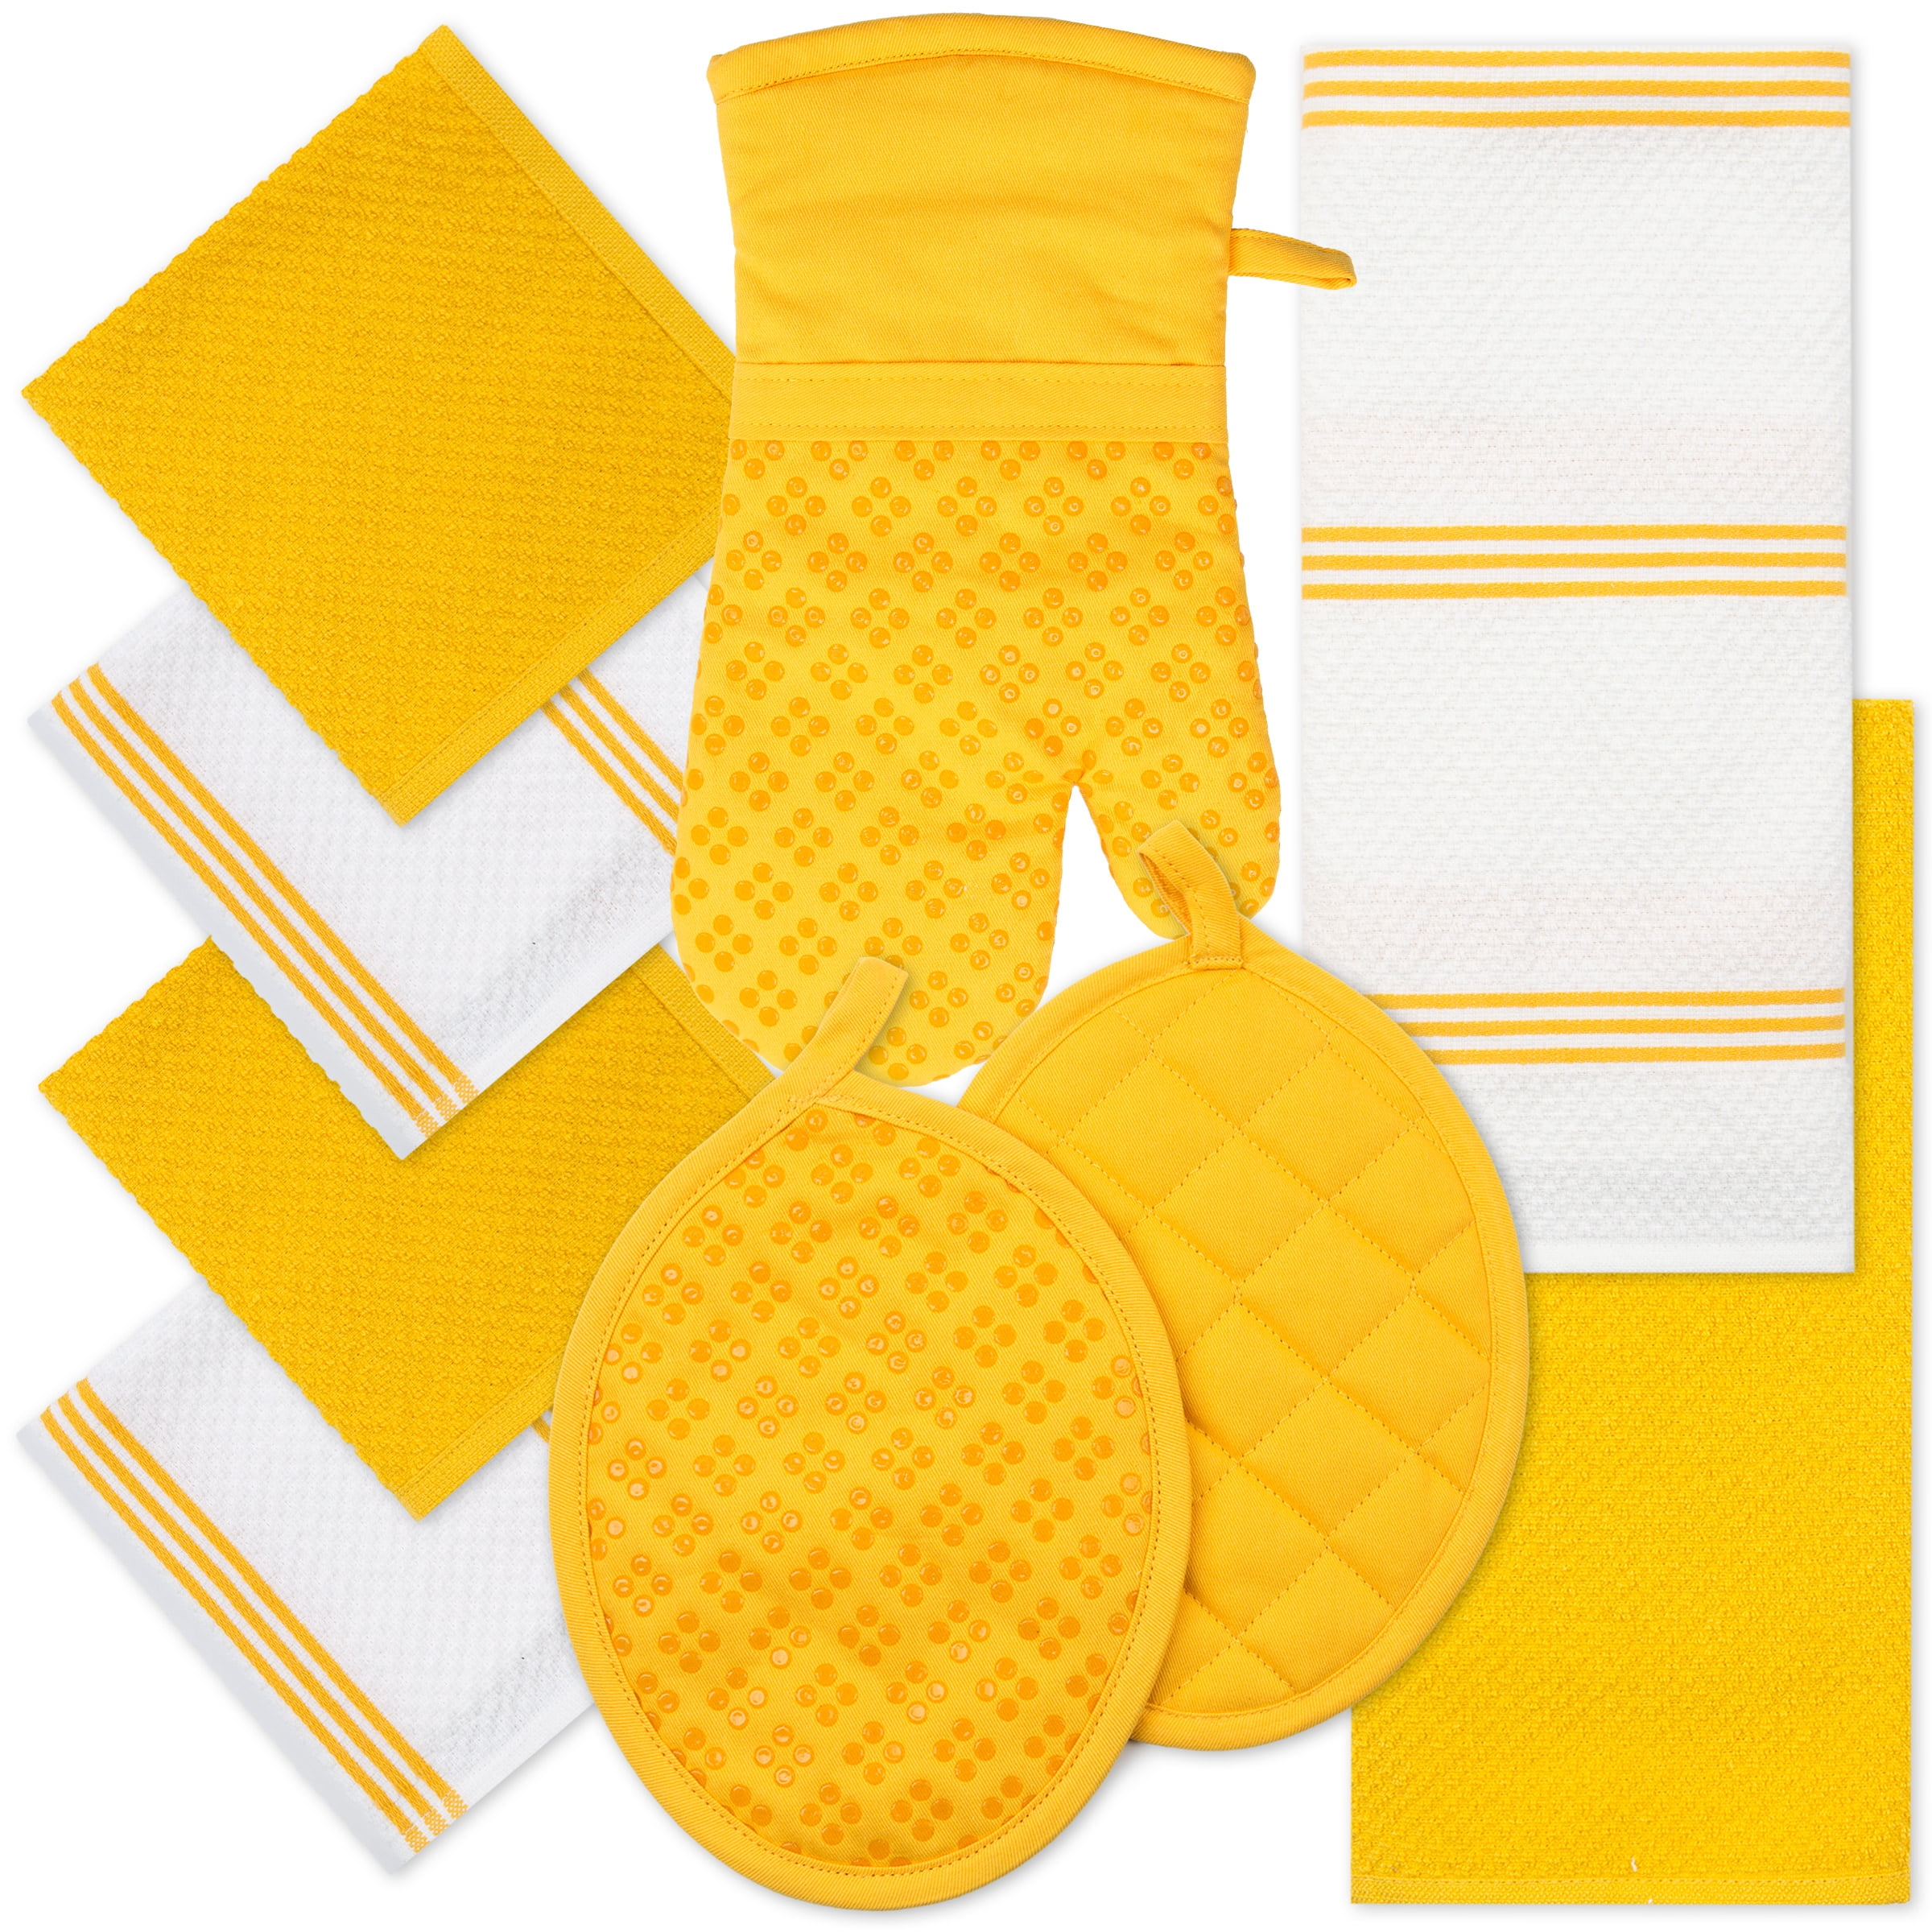 Sticky Toffee Kitchen Towels Dishcloths Oven Mitts and Pot Holders Set of  9, 100% Cotton Terry, Non-Slip Silicone, Yellow